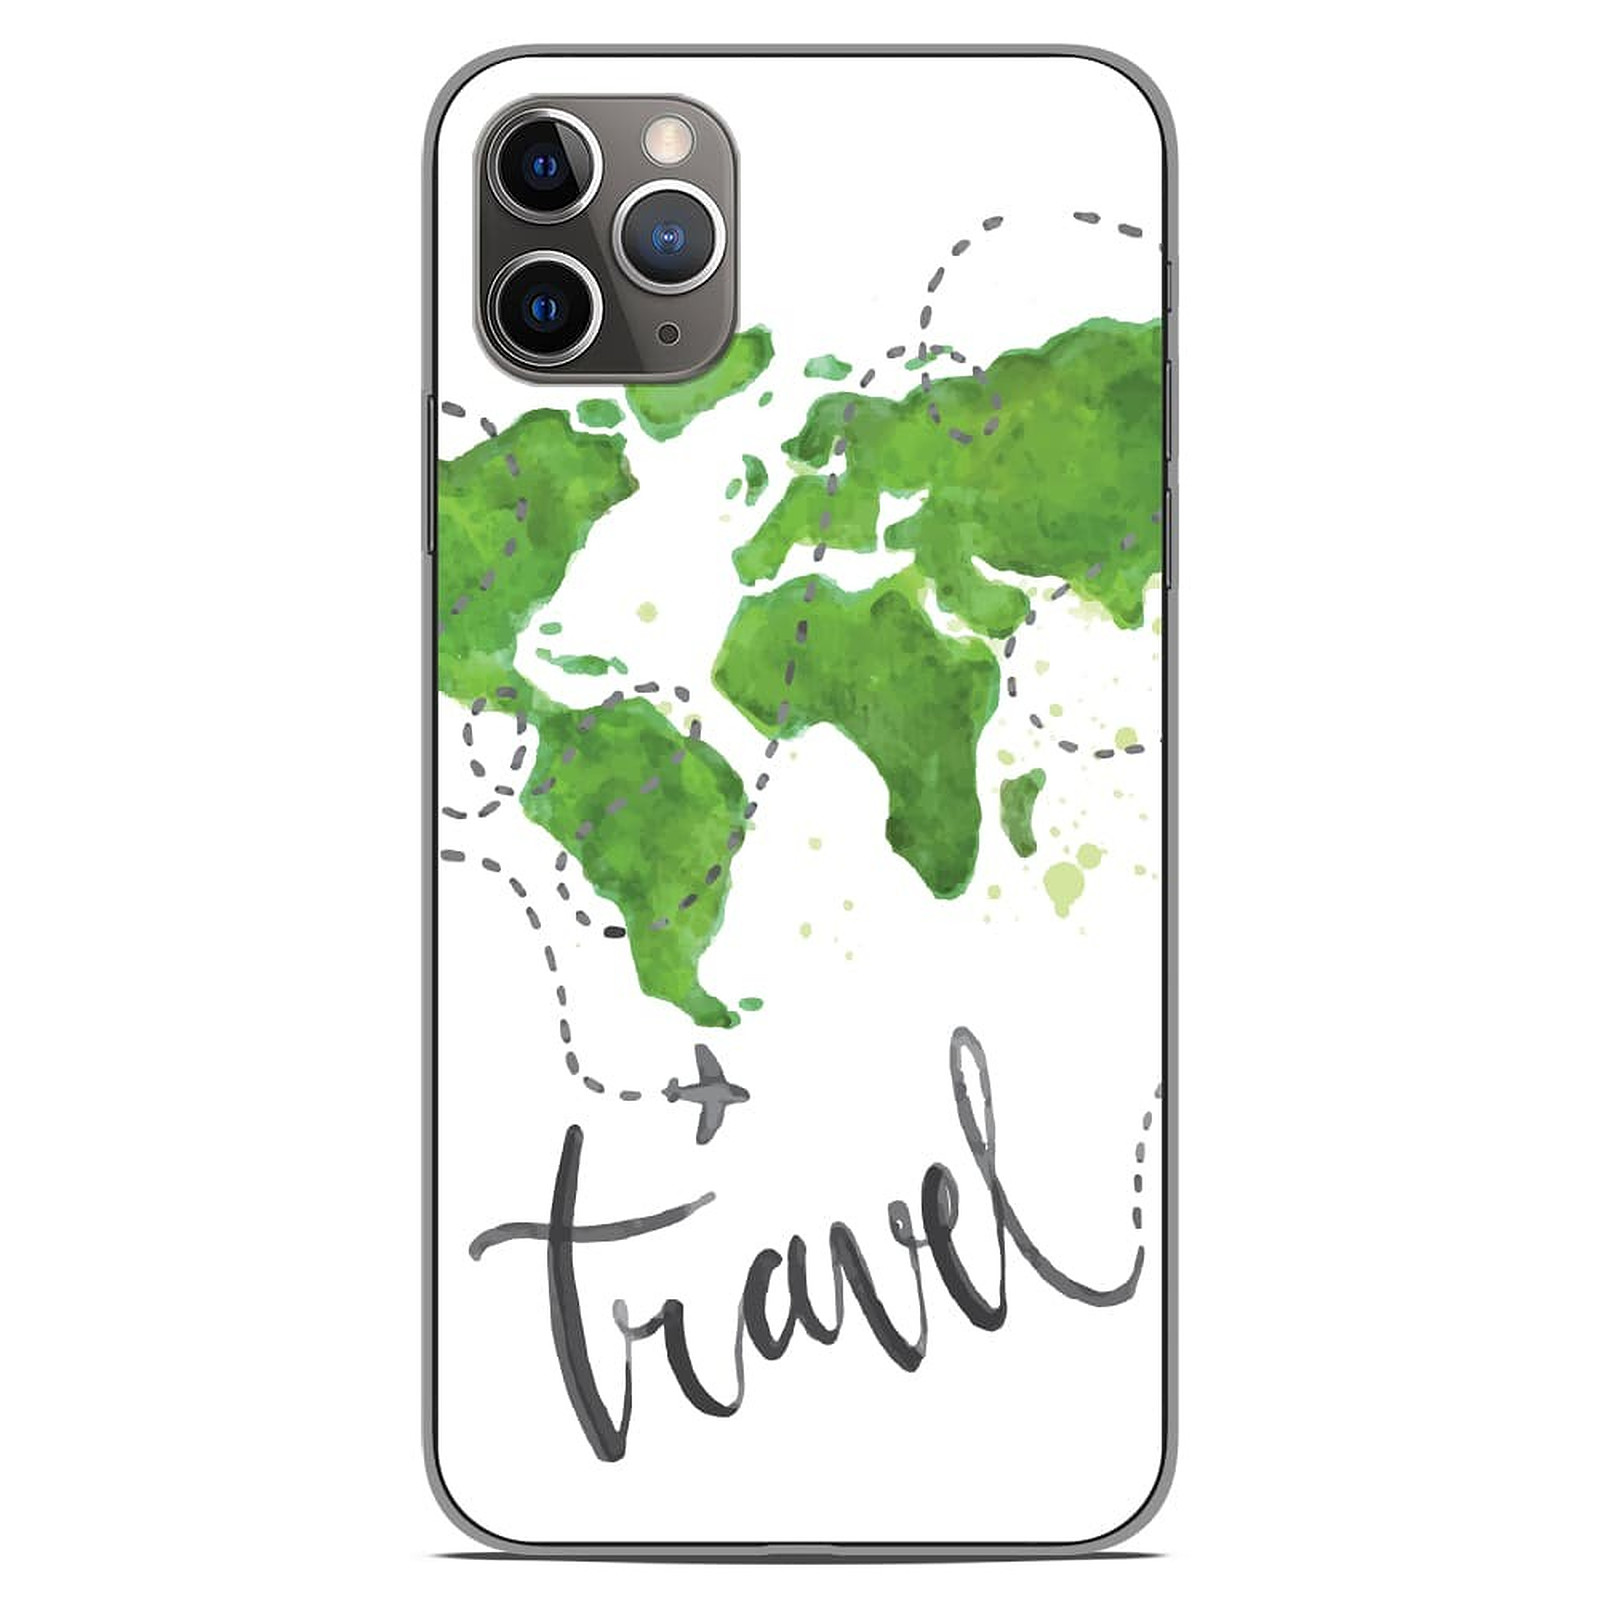 1001 Coques Coque silicone gel Apple iPhone 11 Pro Max motif Map Travel - Coque telephone 1001Coques